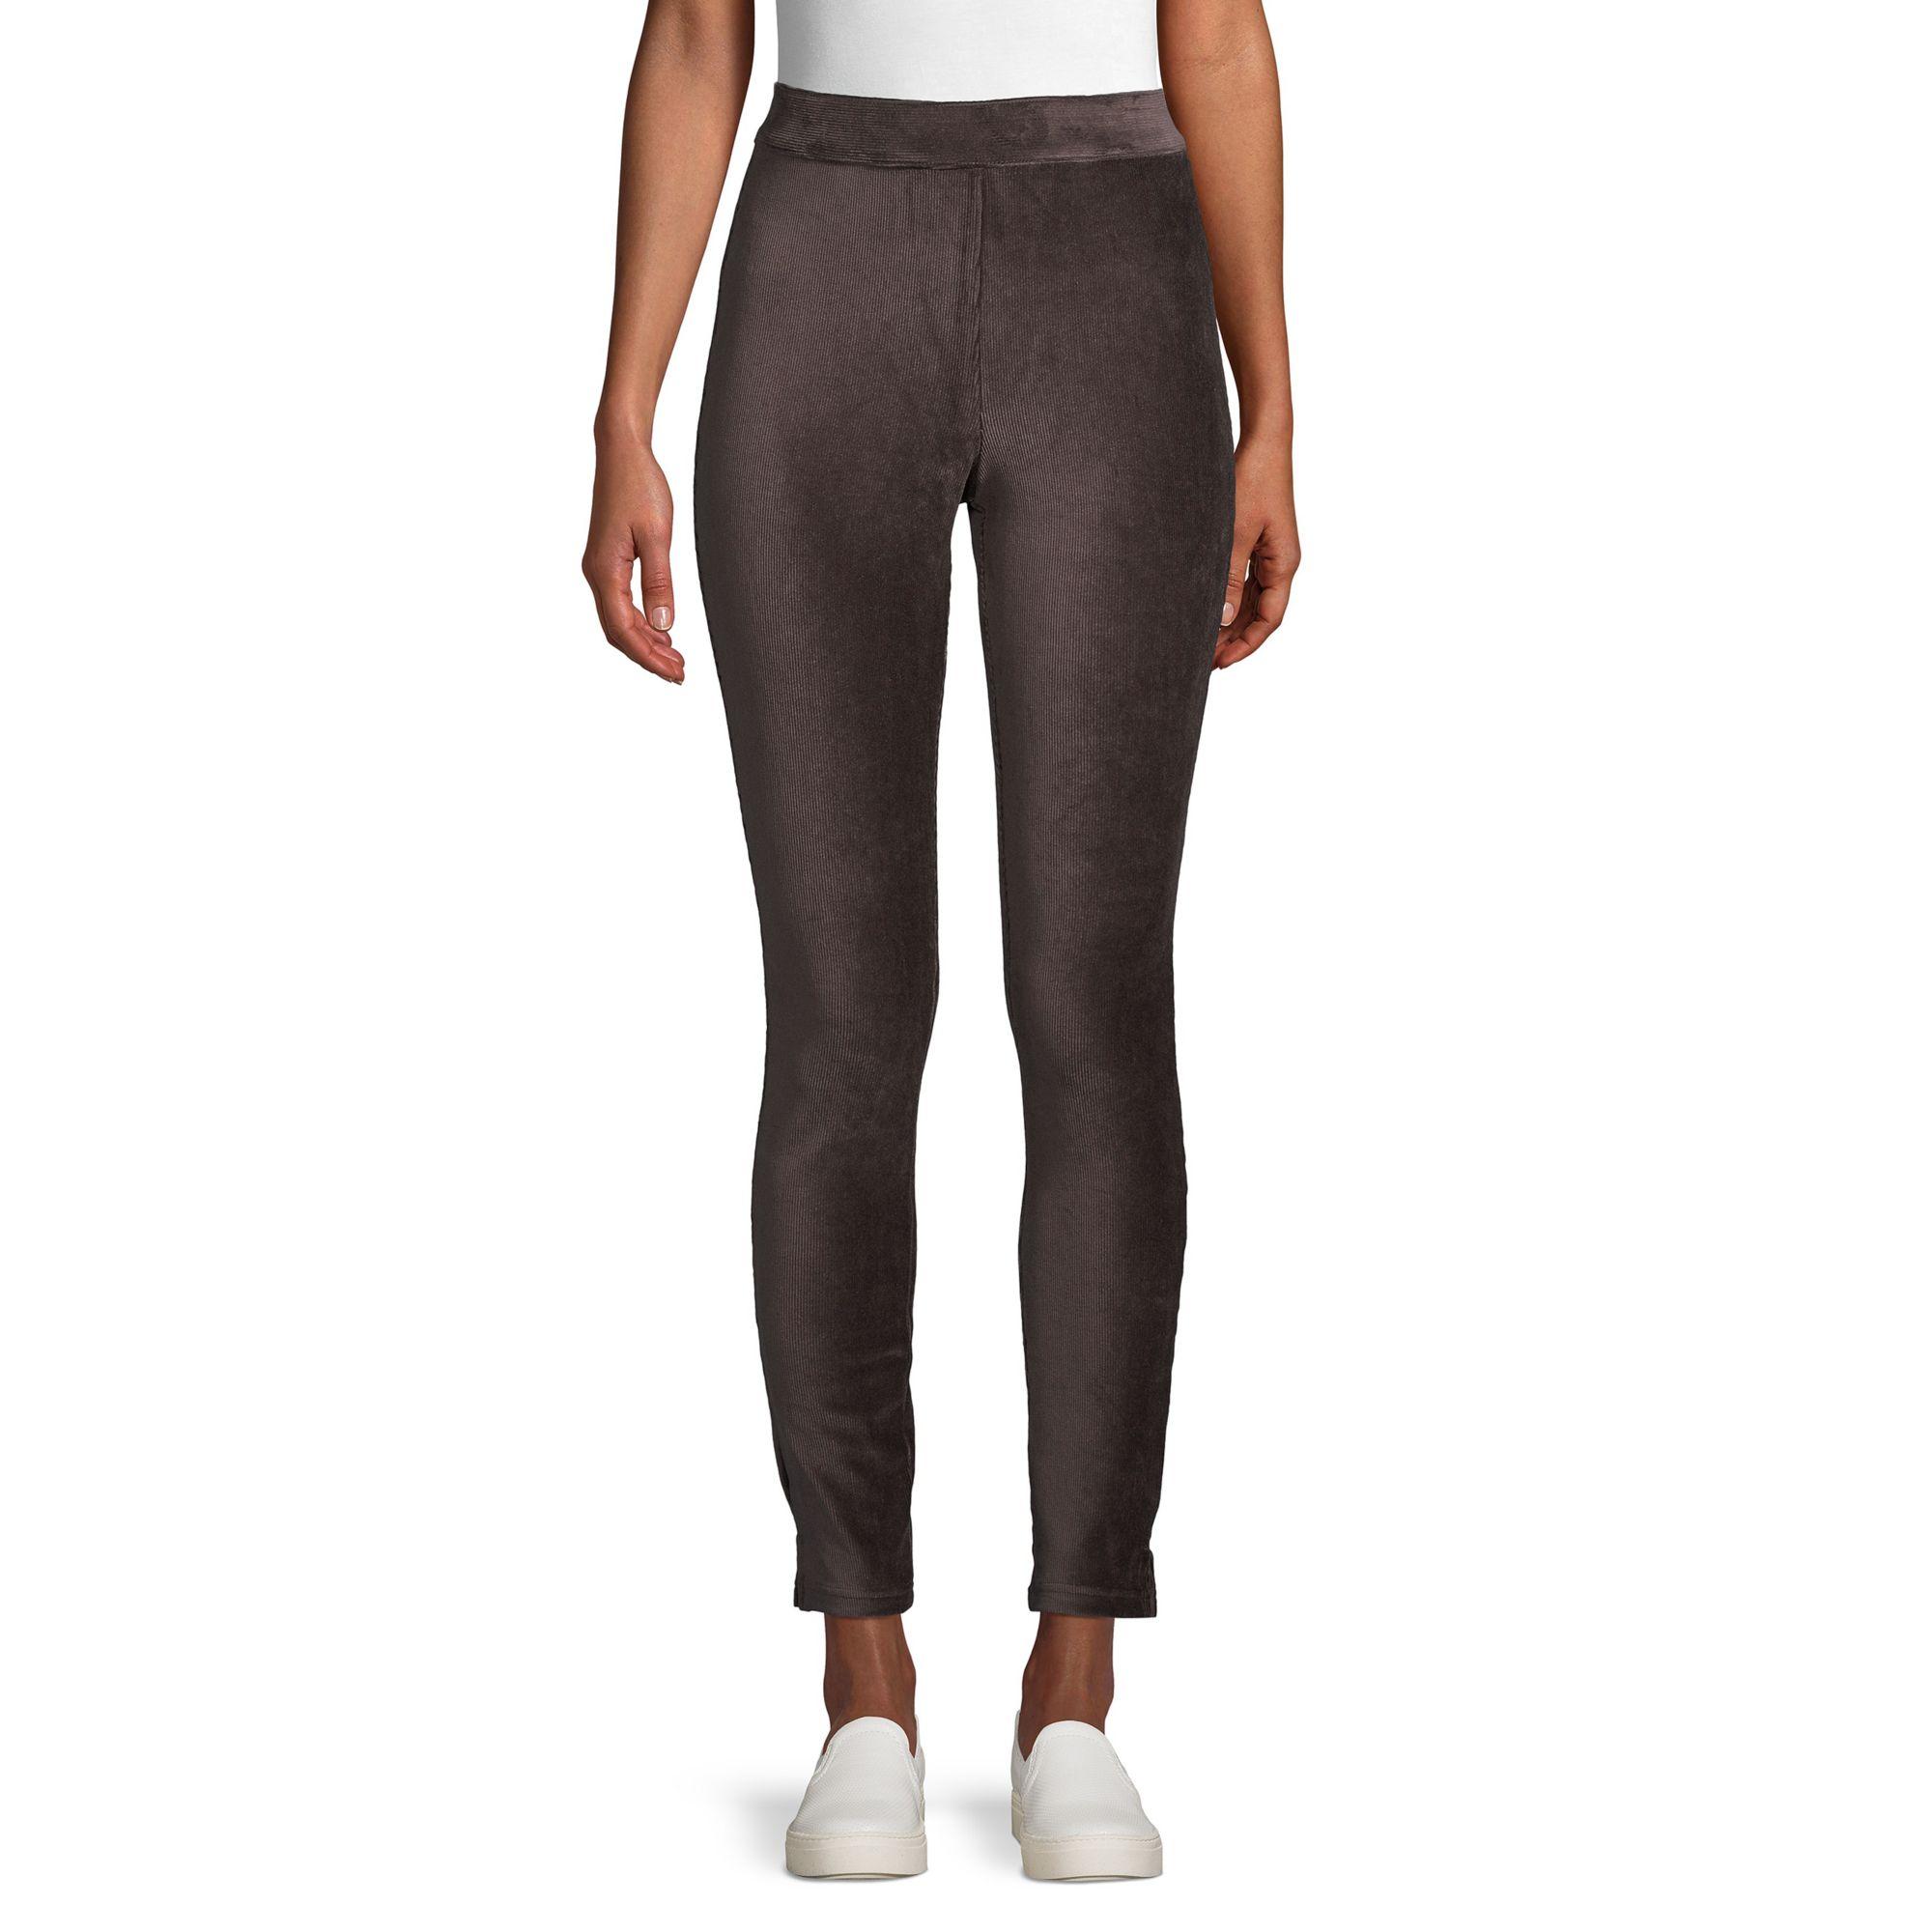 Hue High-waisted Corduroy Pants in Brown - Lyst